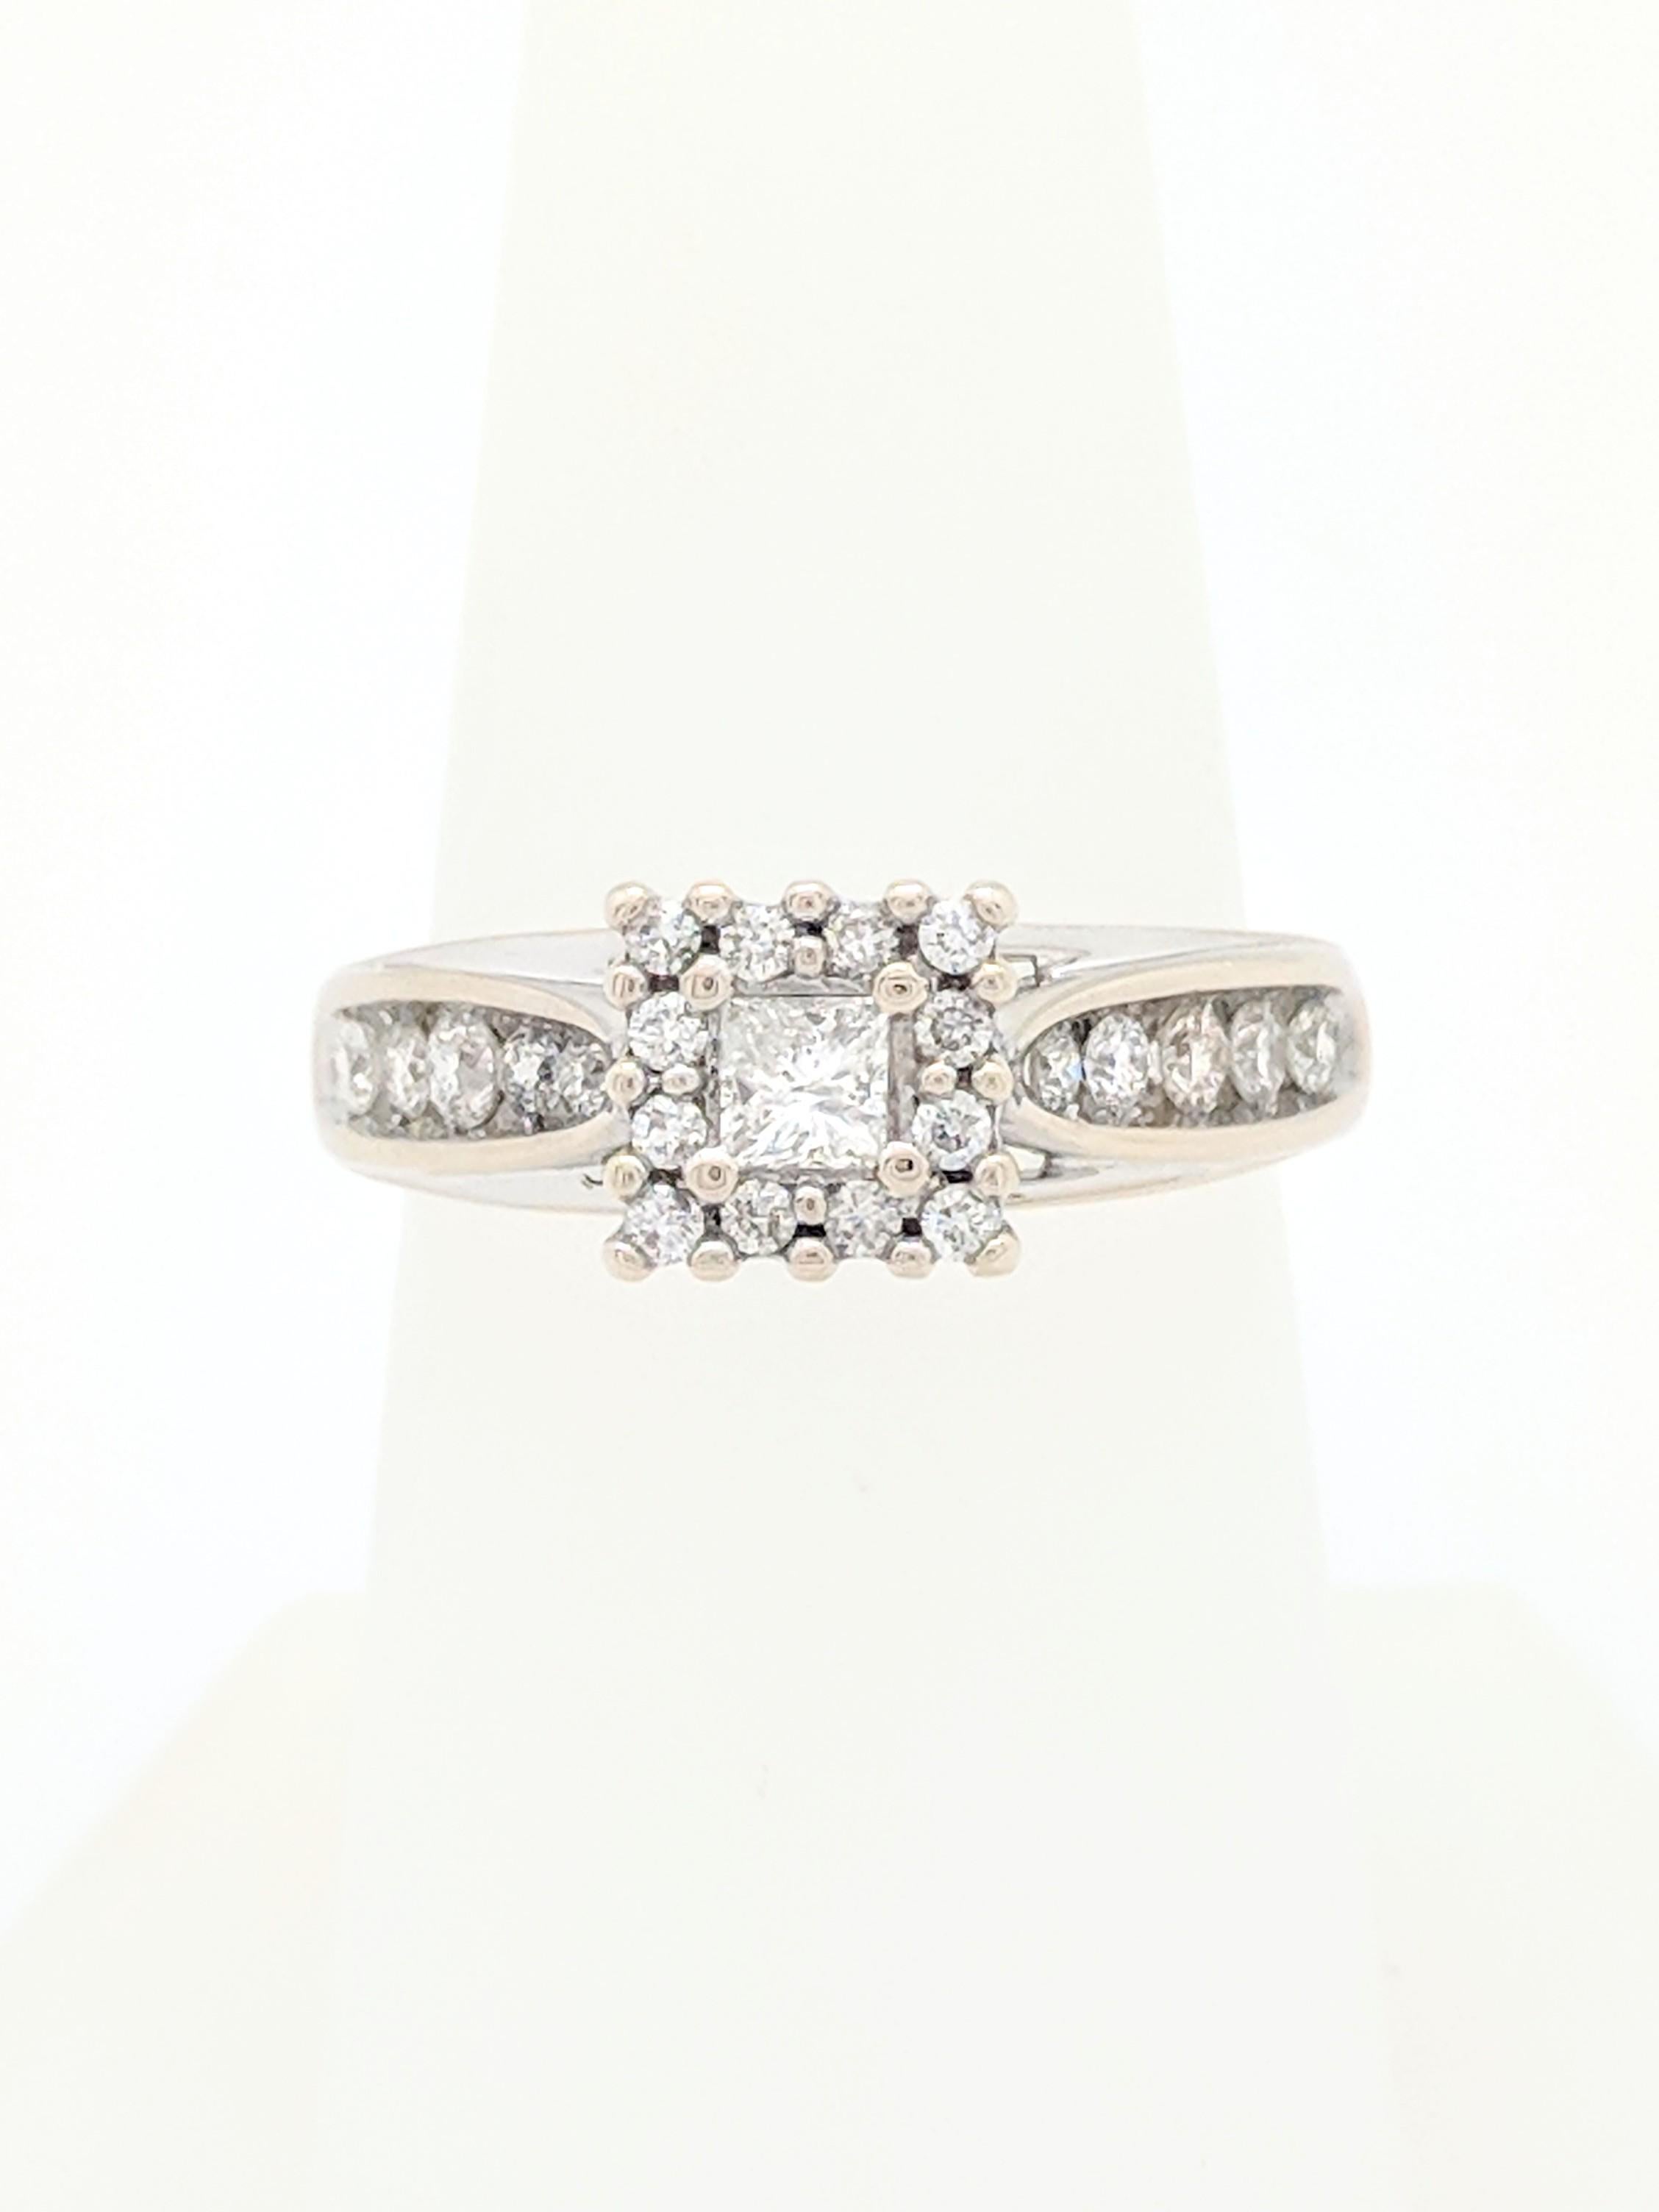 You are viewing a .20ct natural princess cut diamond set in a halo engagement ring. The center stone is beautifully displayed in a 14k white gold diamond halo engagement ring. We estimate this setting to be .40ctw. Total carat weight of engagement